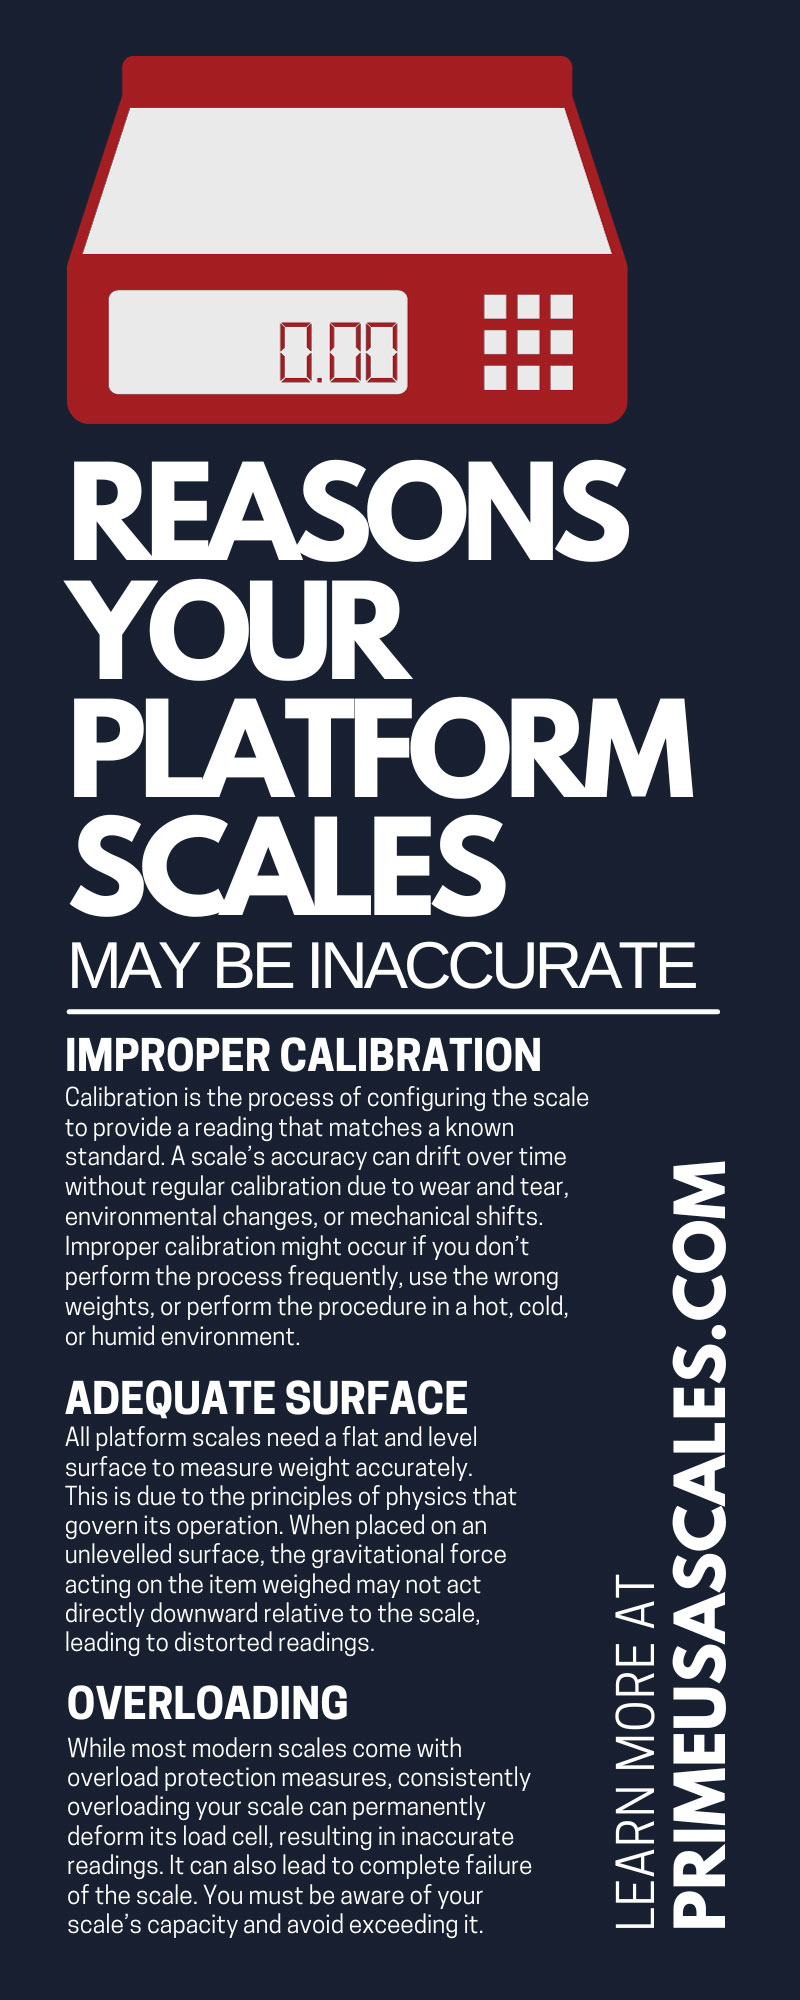 Reasons Your Platform Scales May Be Inaccurate 